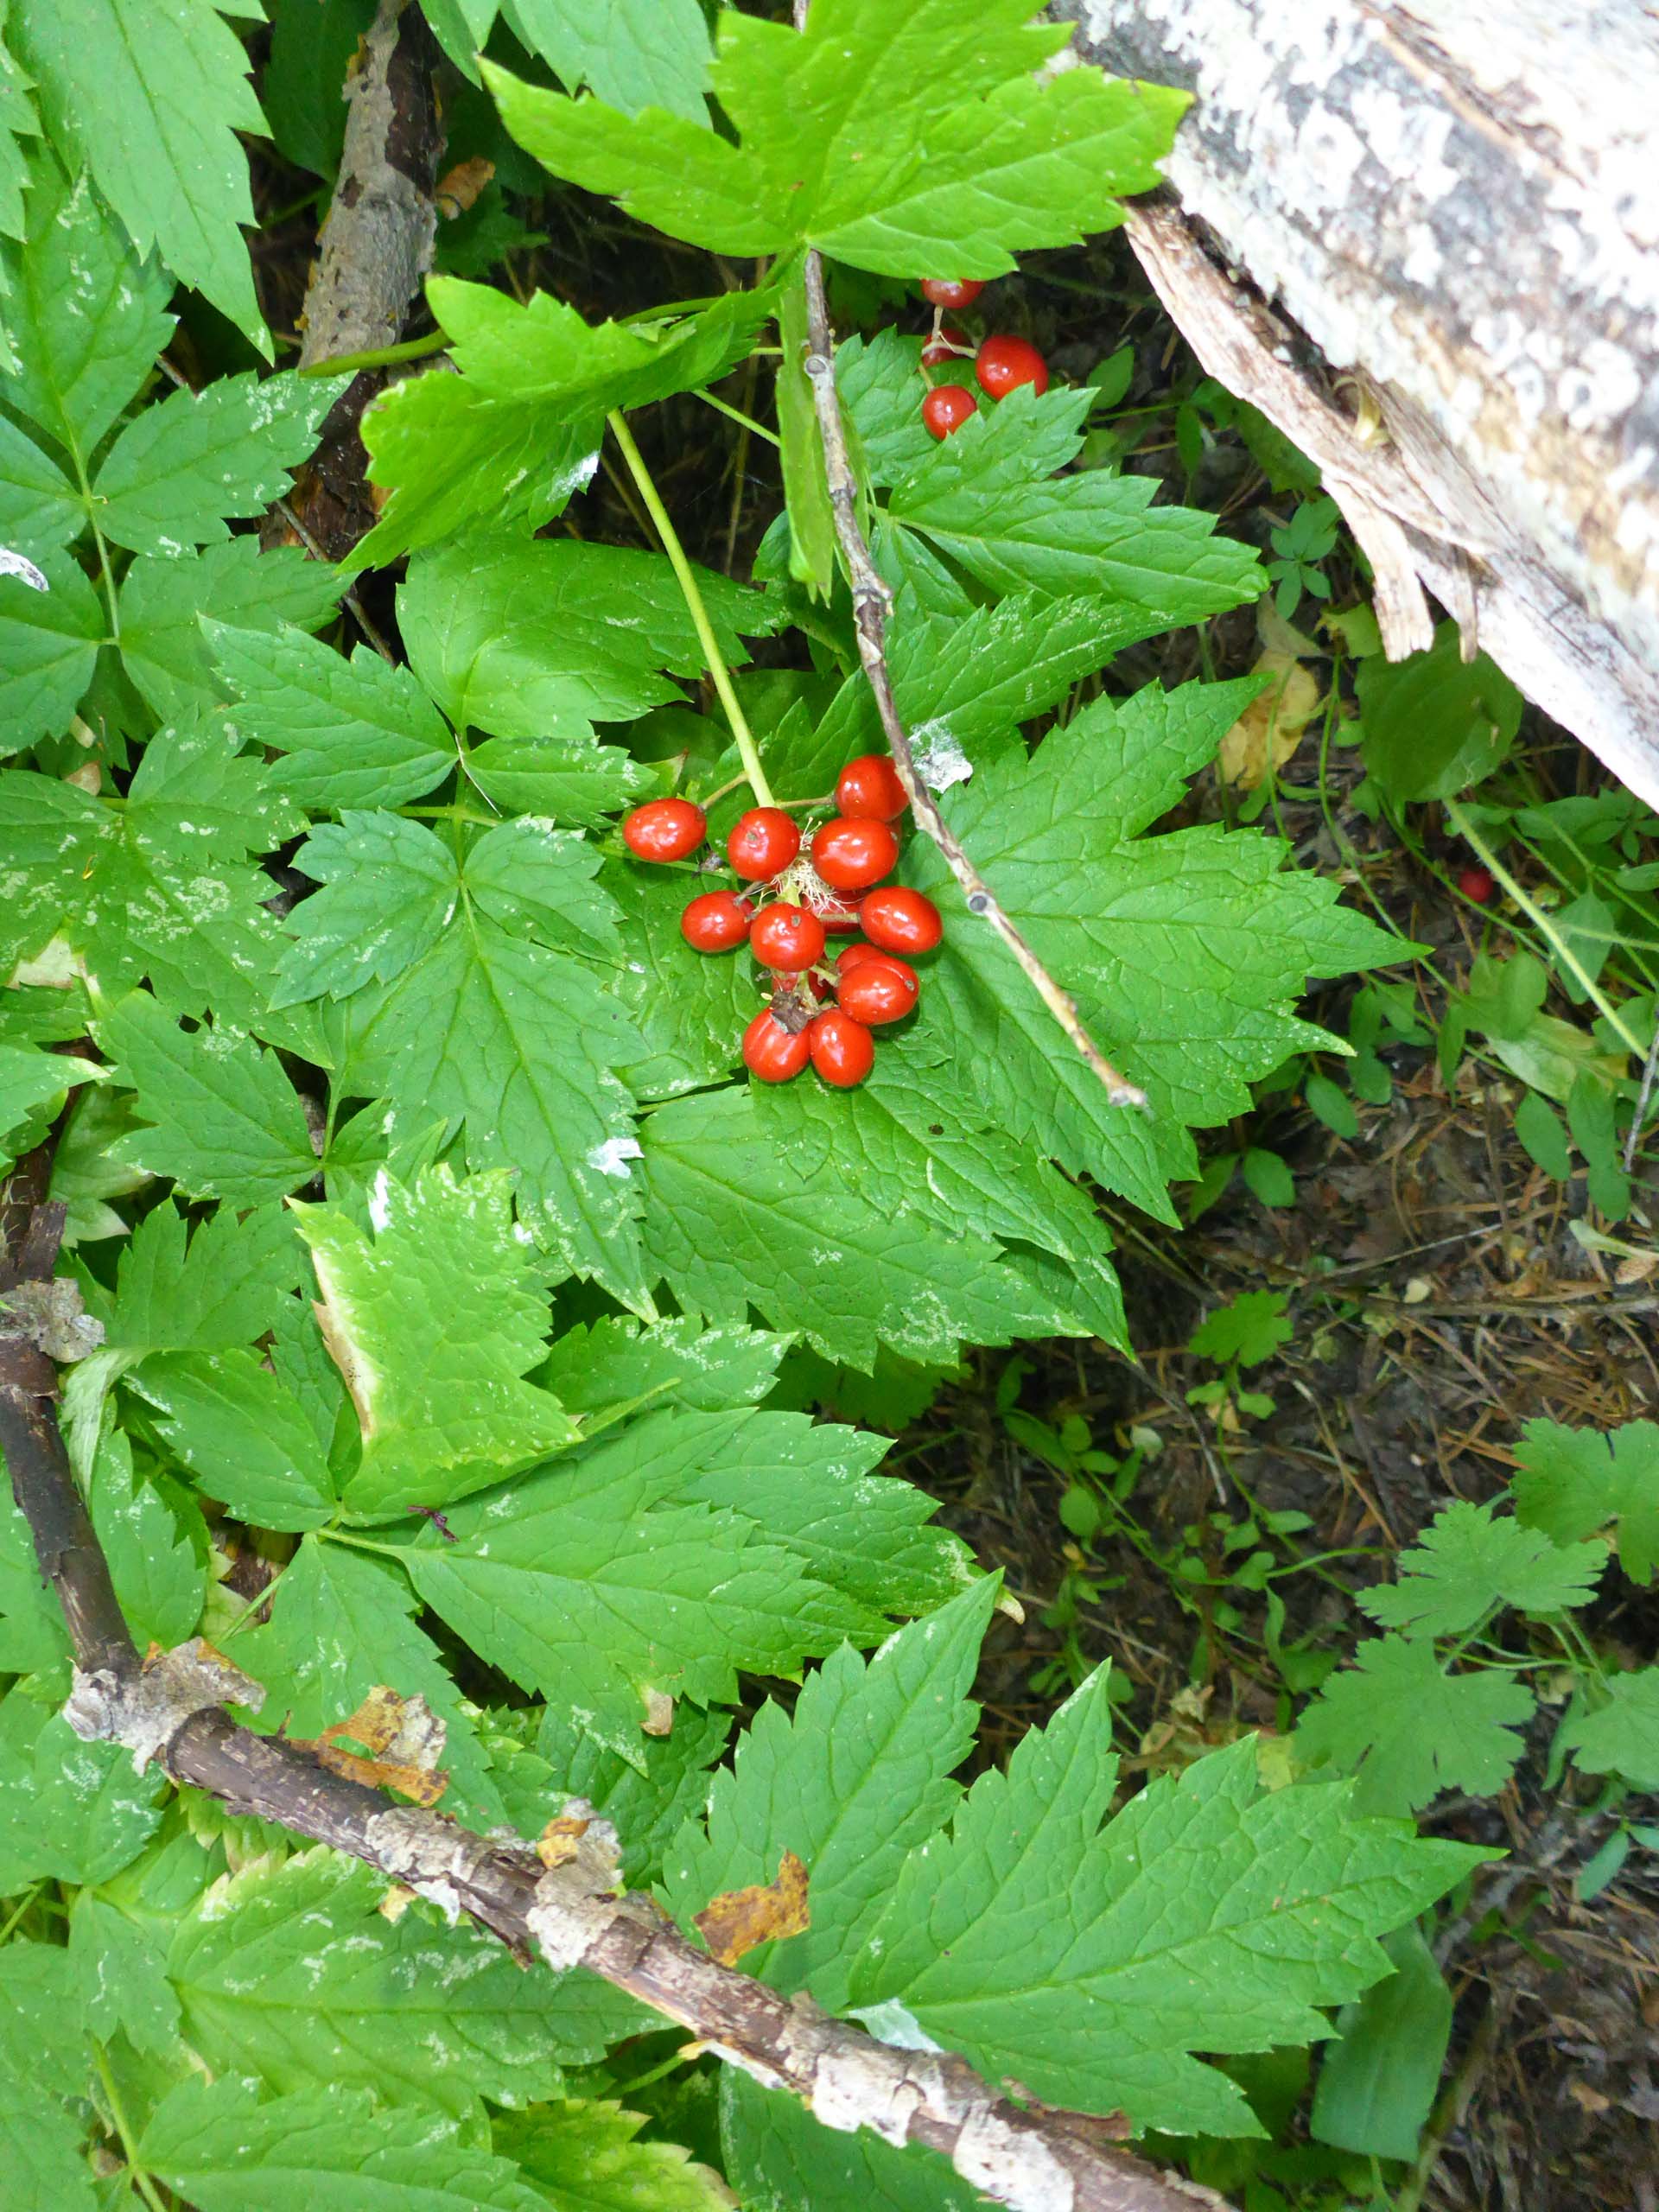 Red baneberry in fruit. D. Burk.